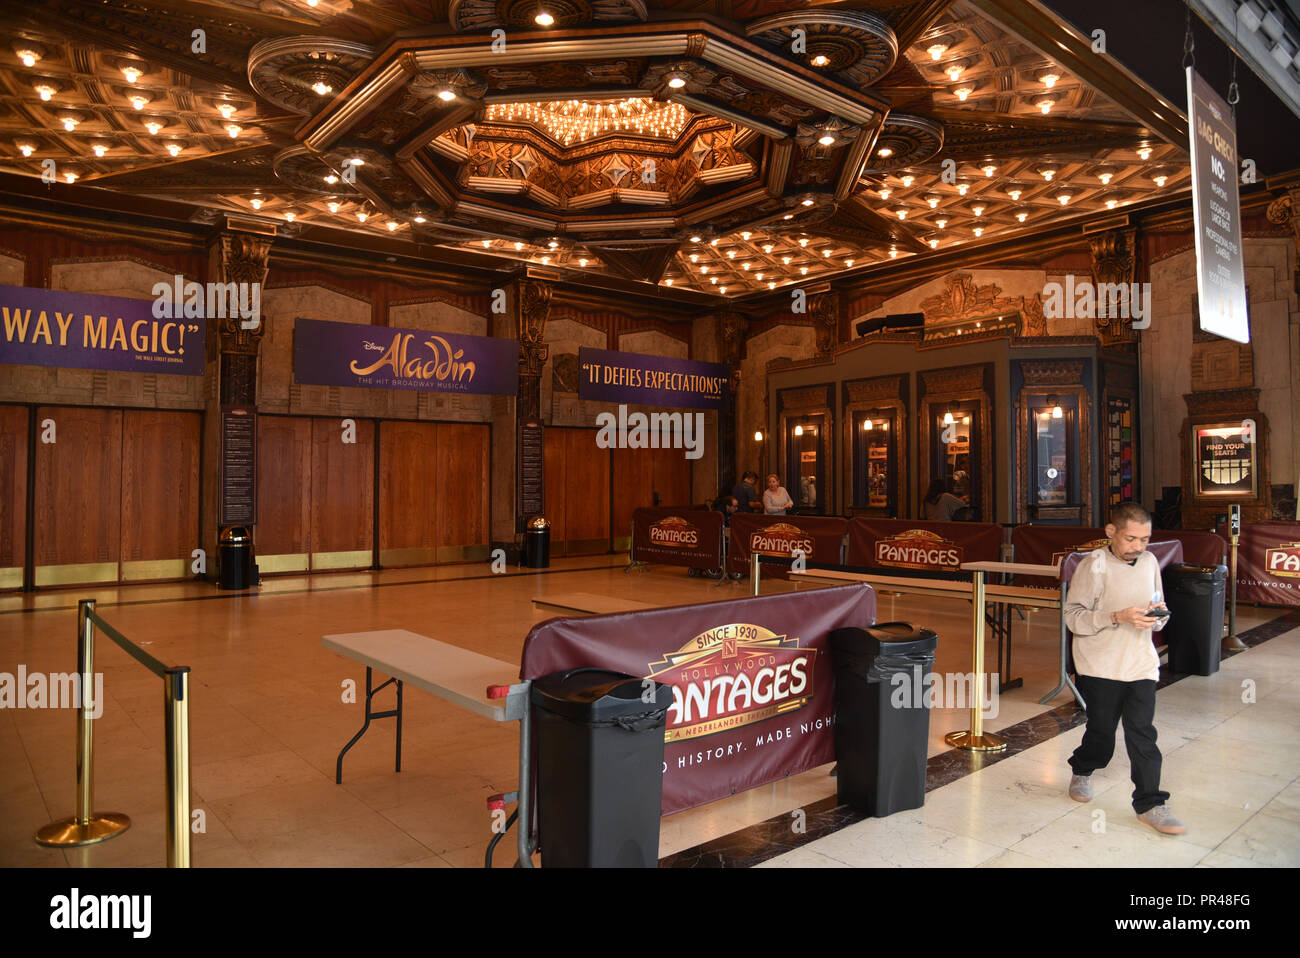 Los Angeles, CA - January 19, 2018: The lobby of the iconic Pantages Theatre opens up onto the Hollywood Walk of Fame Stock Photo